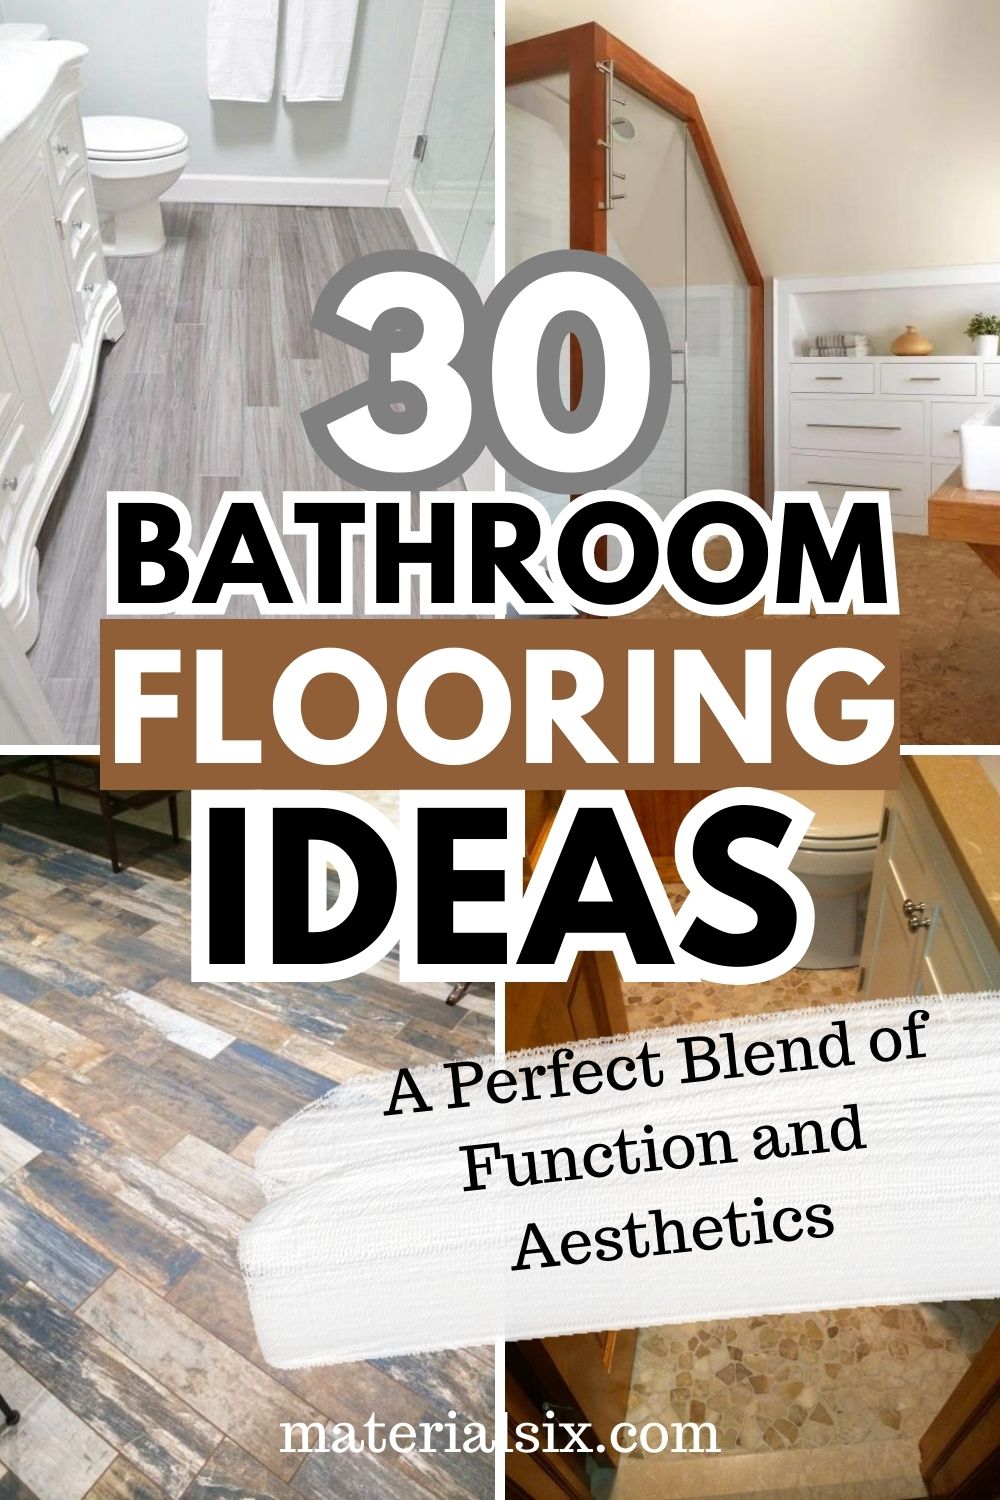 30 Bathroom Flooring Ideas: A Perfect Blend of Function and Aesthetics